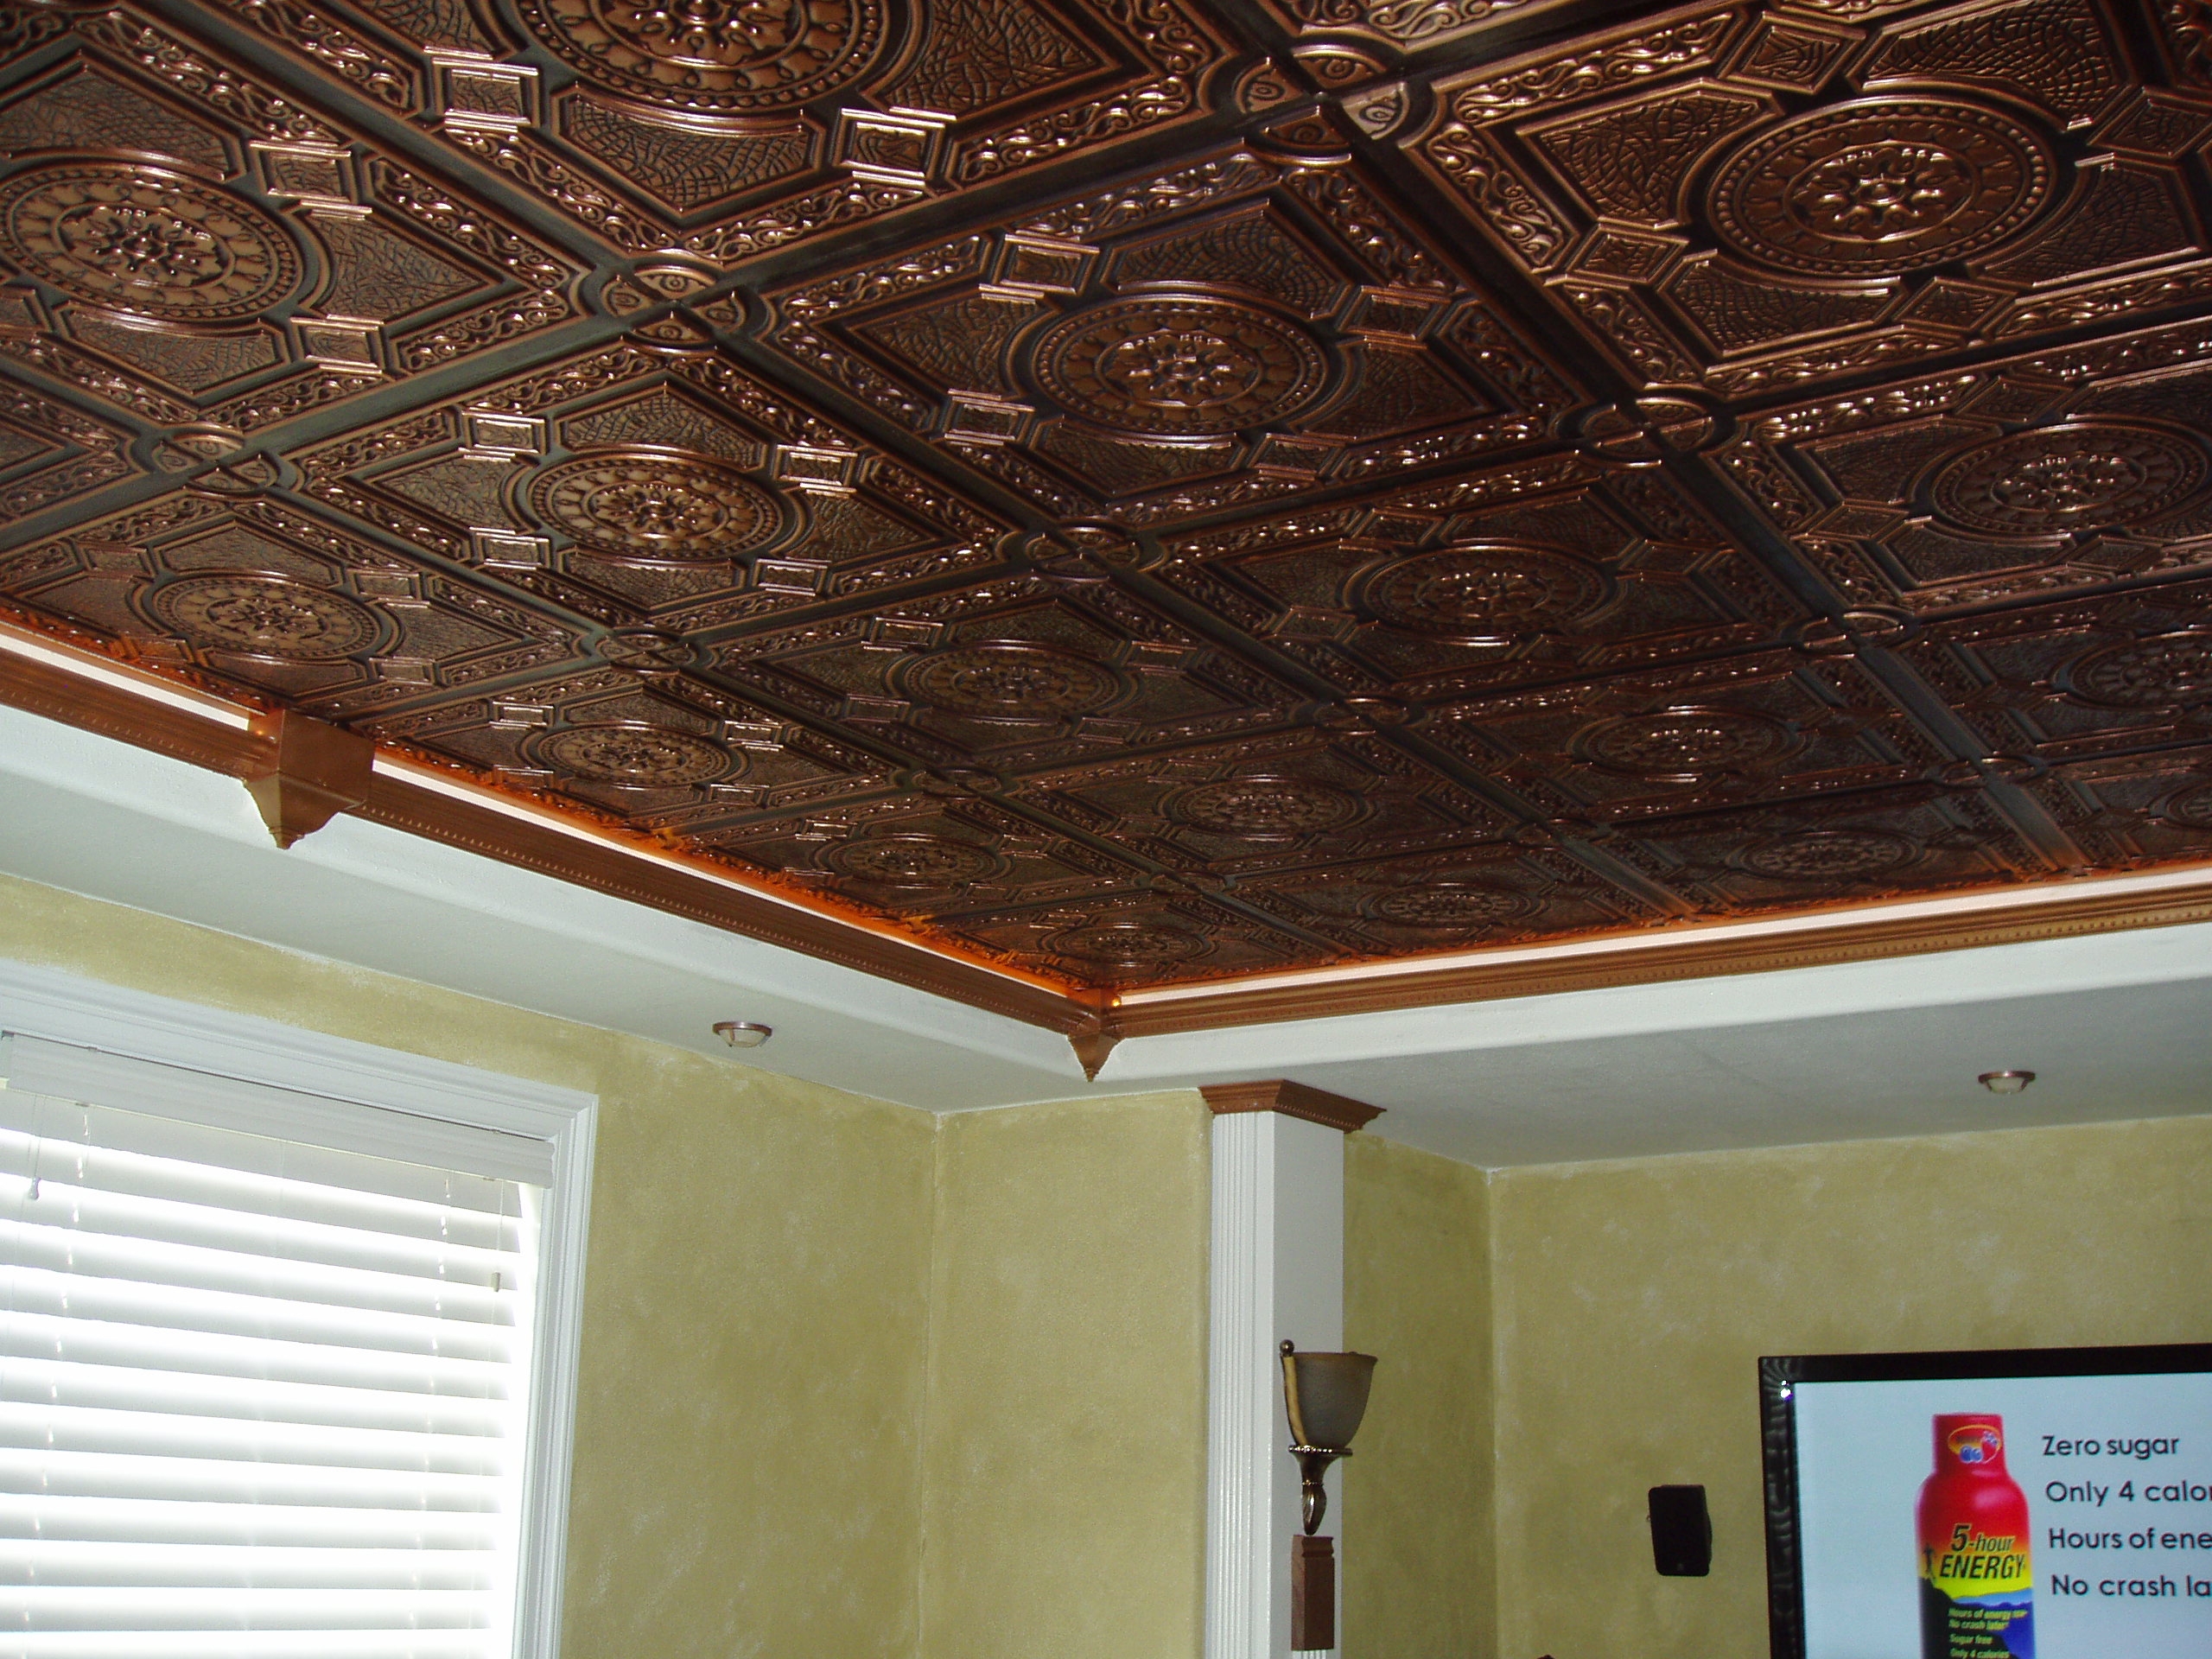 Nail Up Acoustic Ceiling Tiles